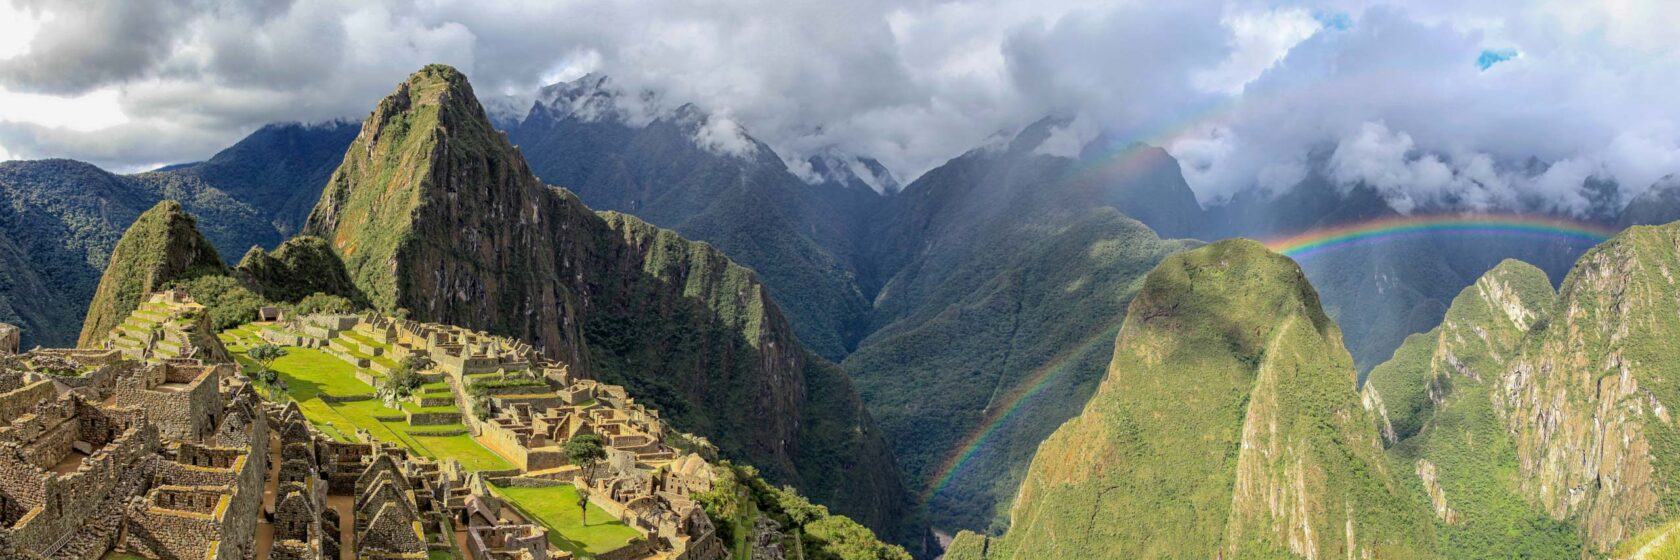 Macchu Picchu in late afternoon with rainbow in the background.